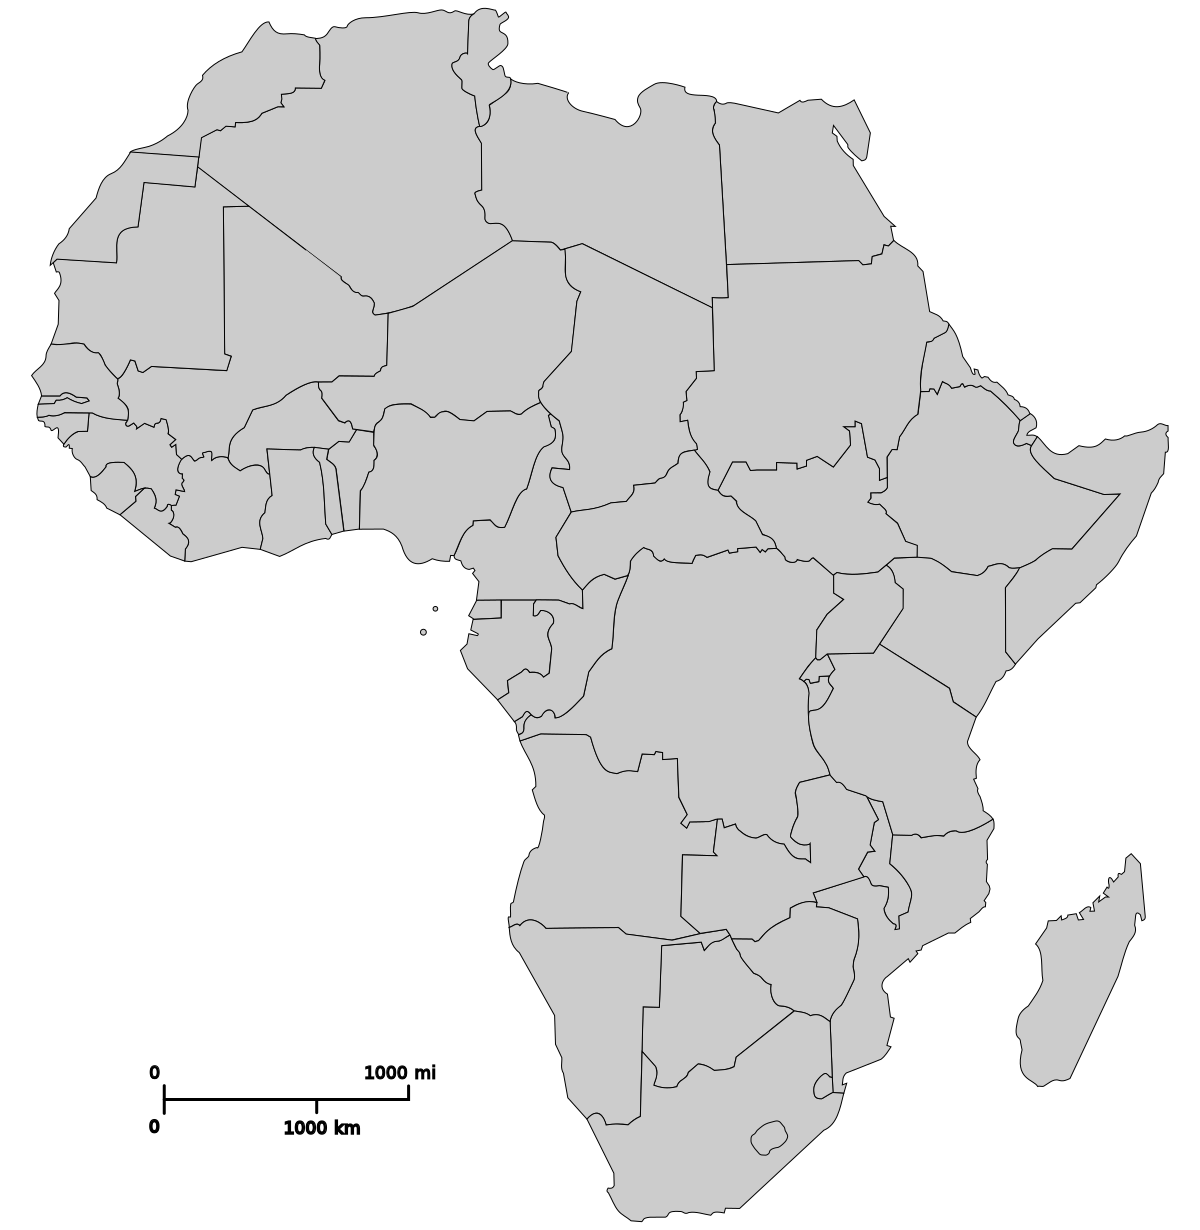 Africa Map PNG Image Background